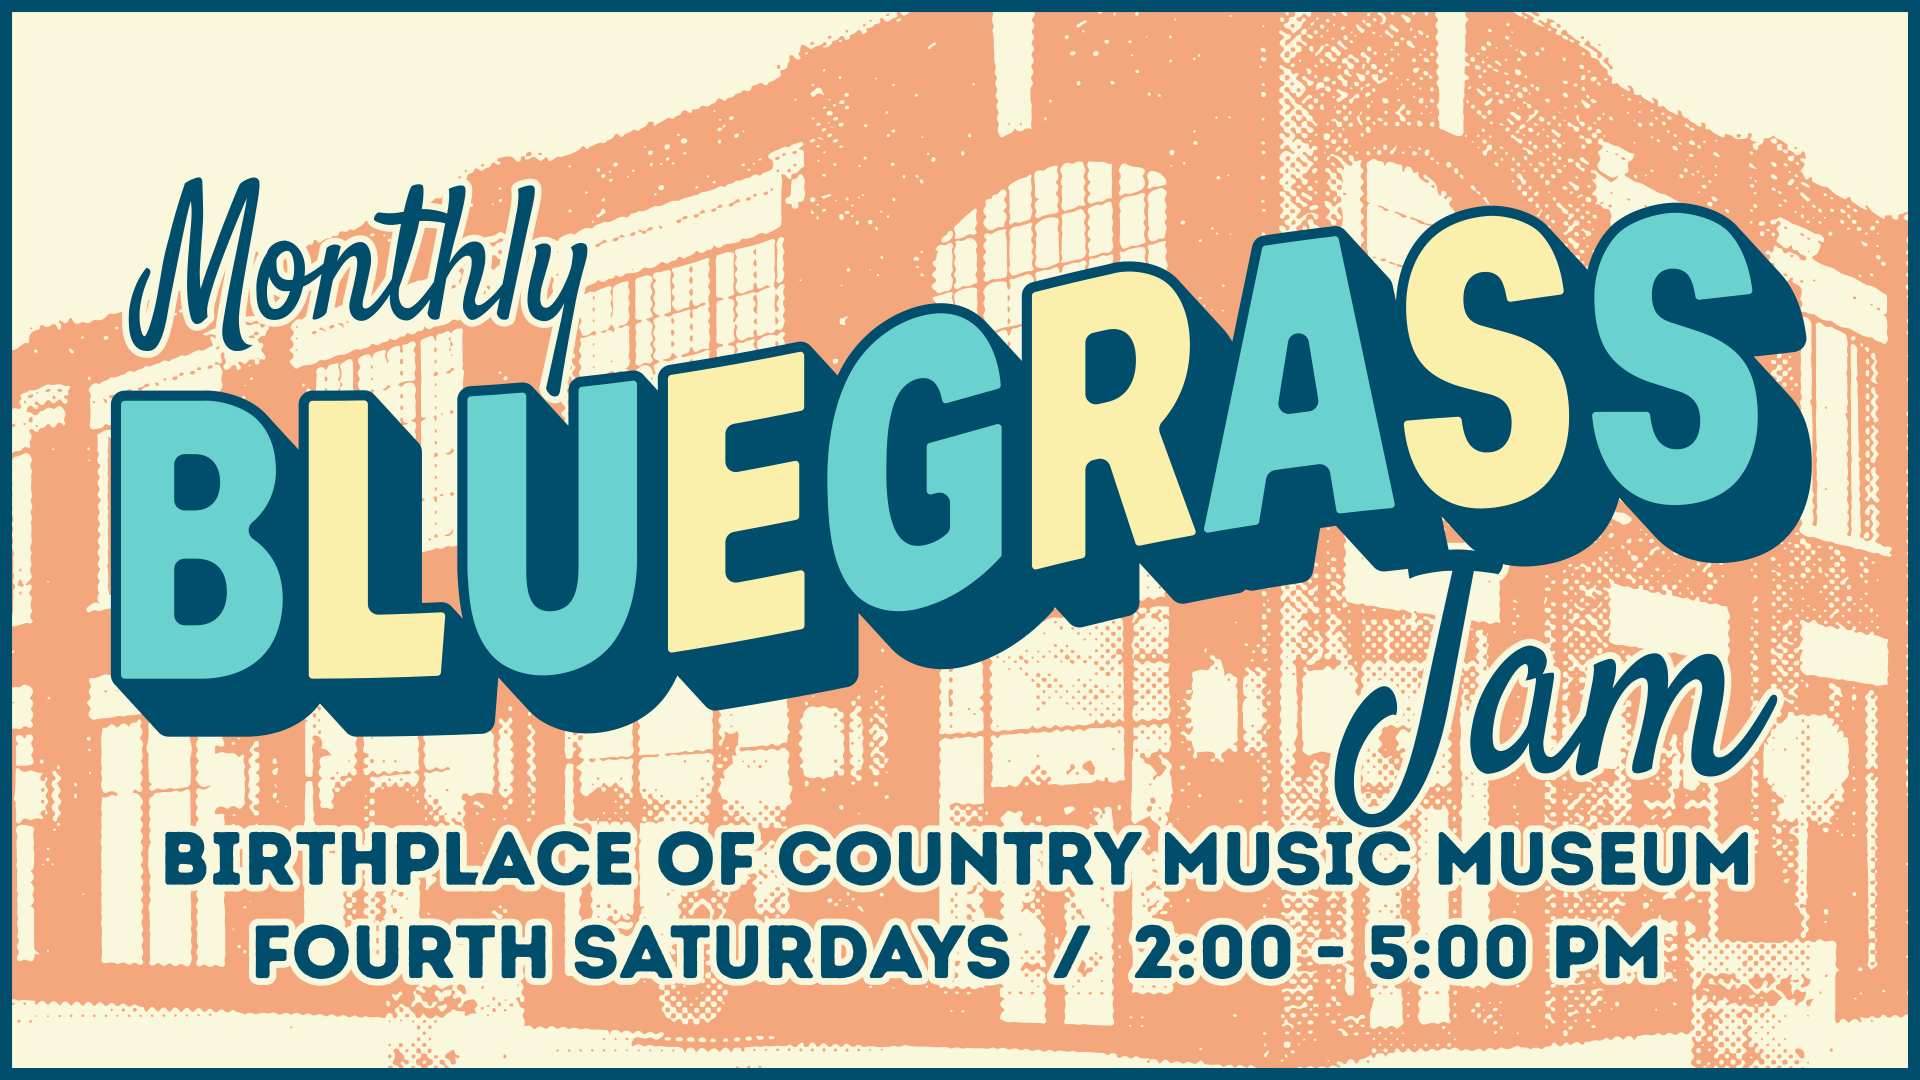 Graphic image featuring the Birthplace of Country Music Museum in the background with Monthly Bluegrass Jam superimposed over image and dates, every fourth Saturday 2 to 5 p.m.